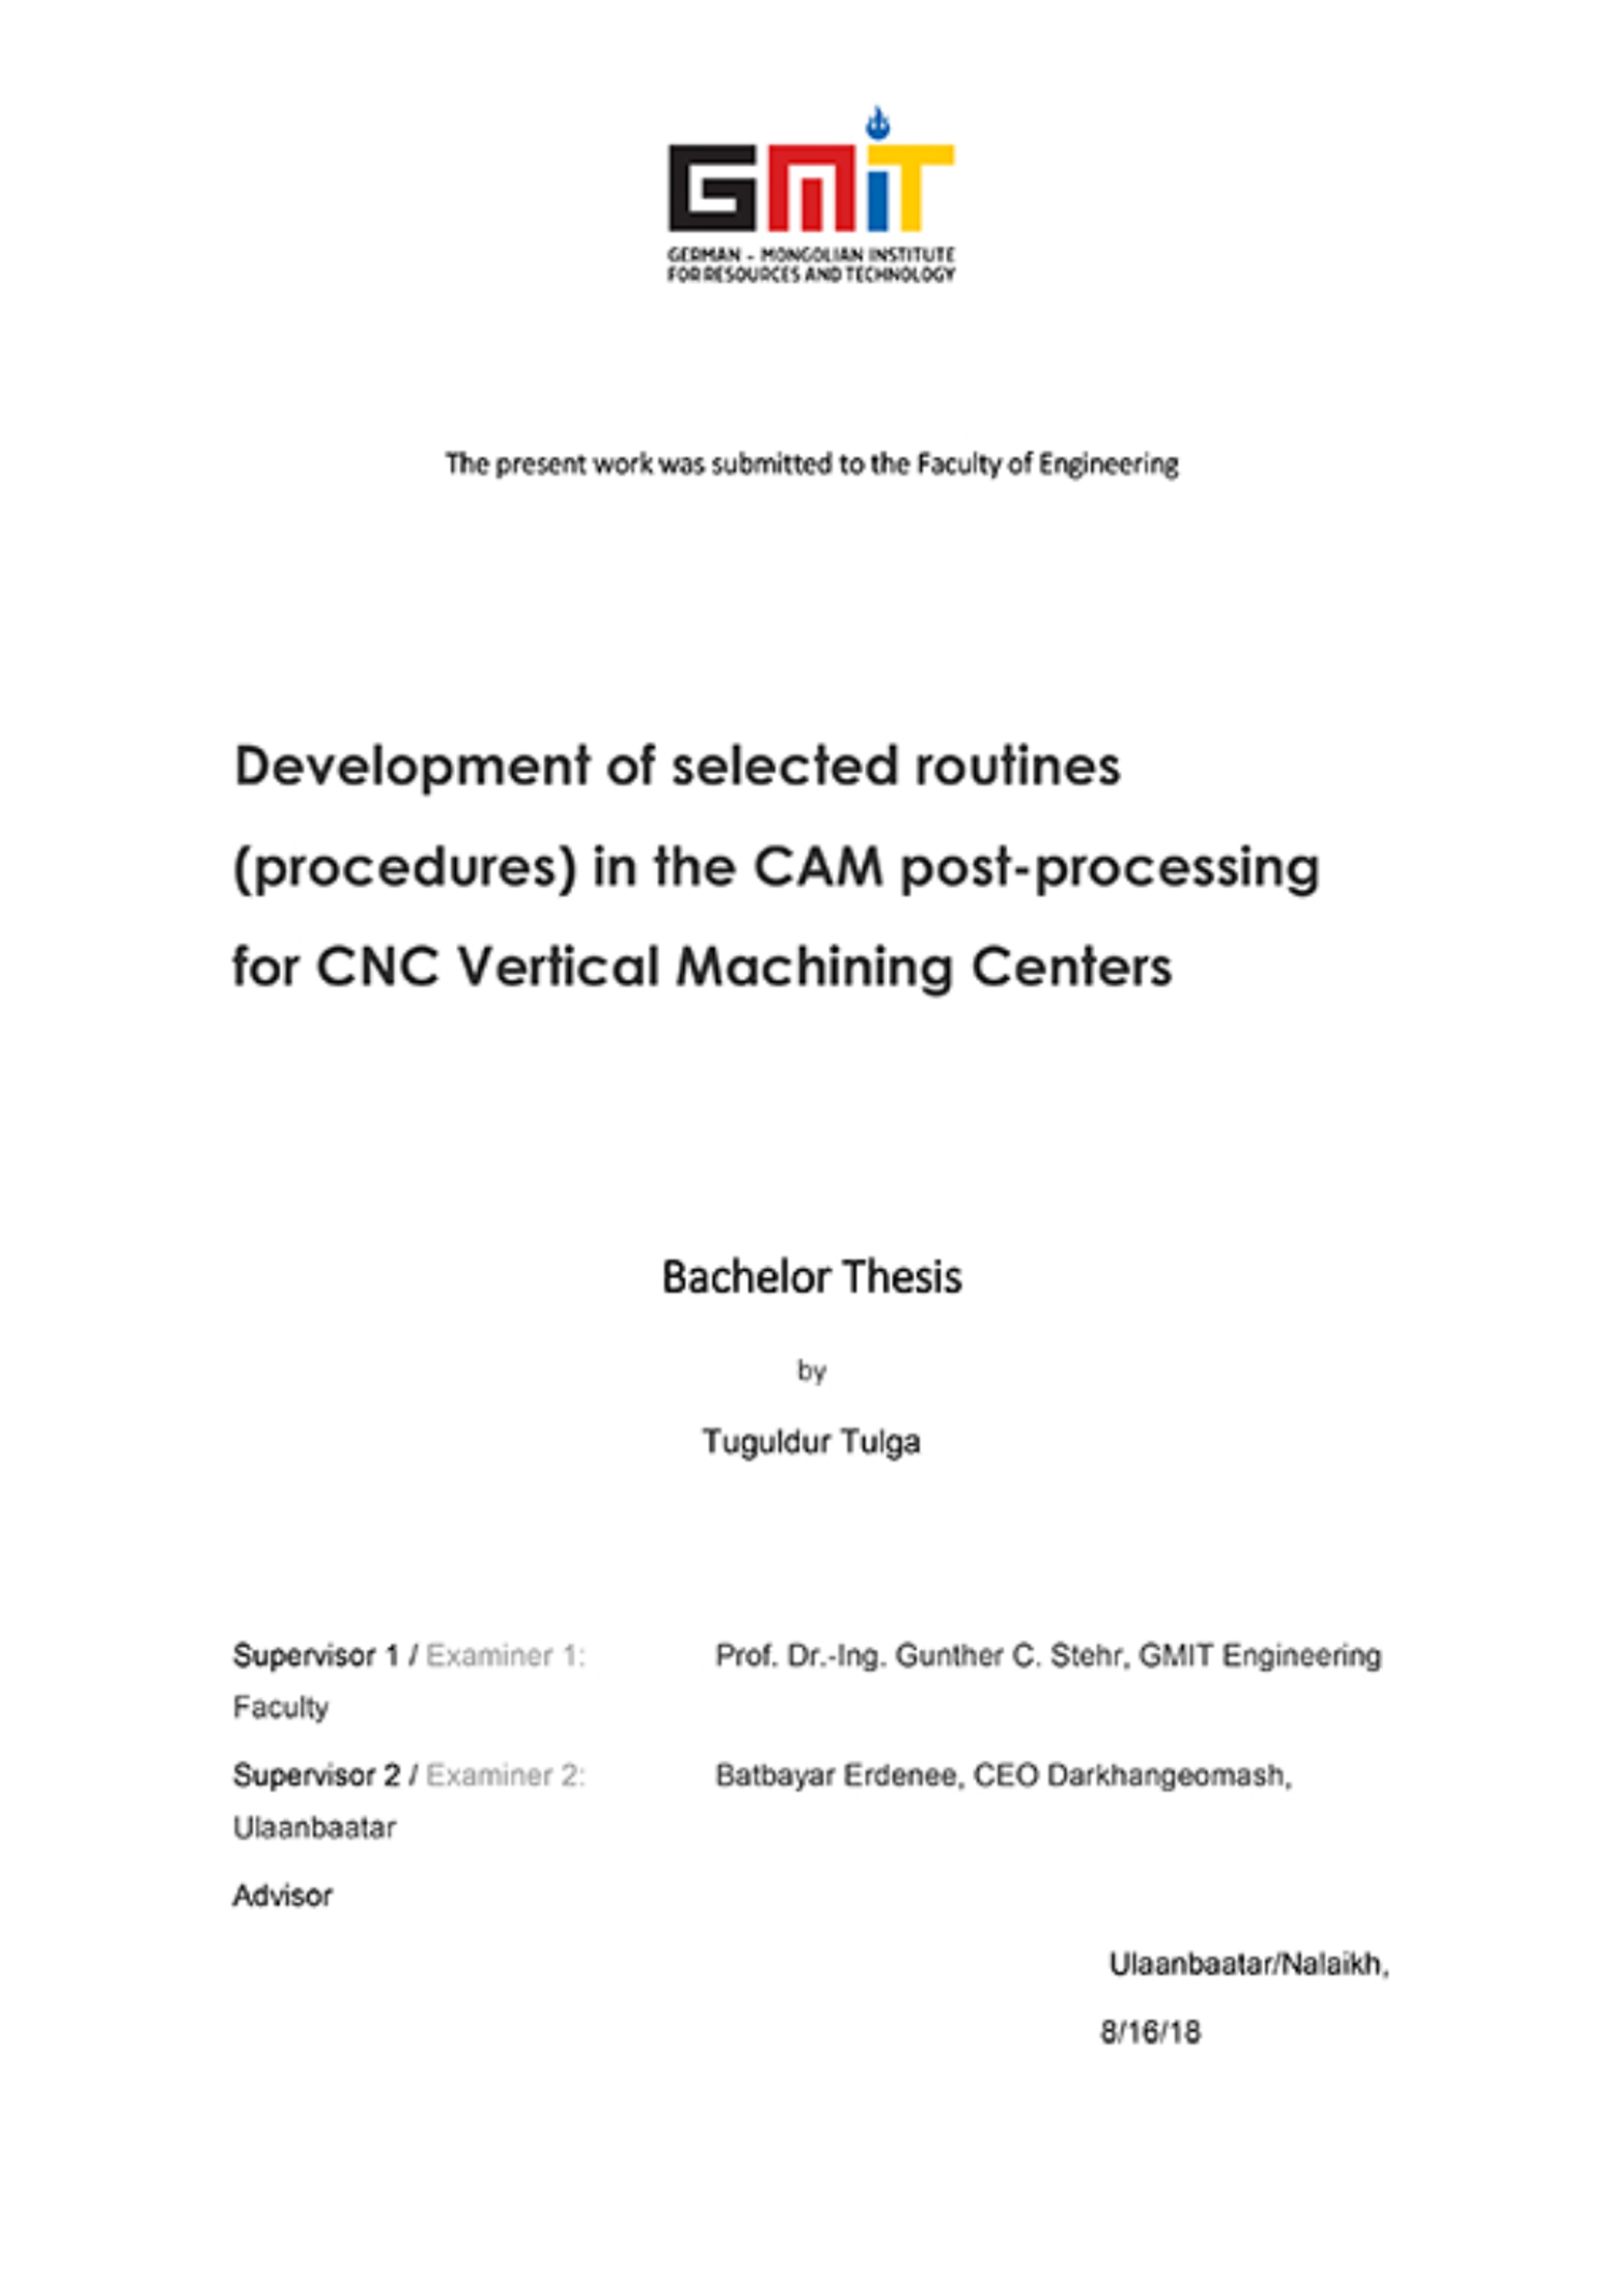 Development of selected routines (procedures) in the CAM post-processing for CNC Vertical Machining Centers